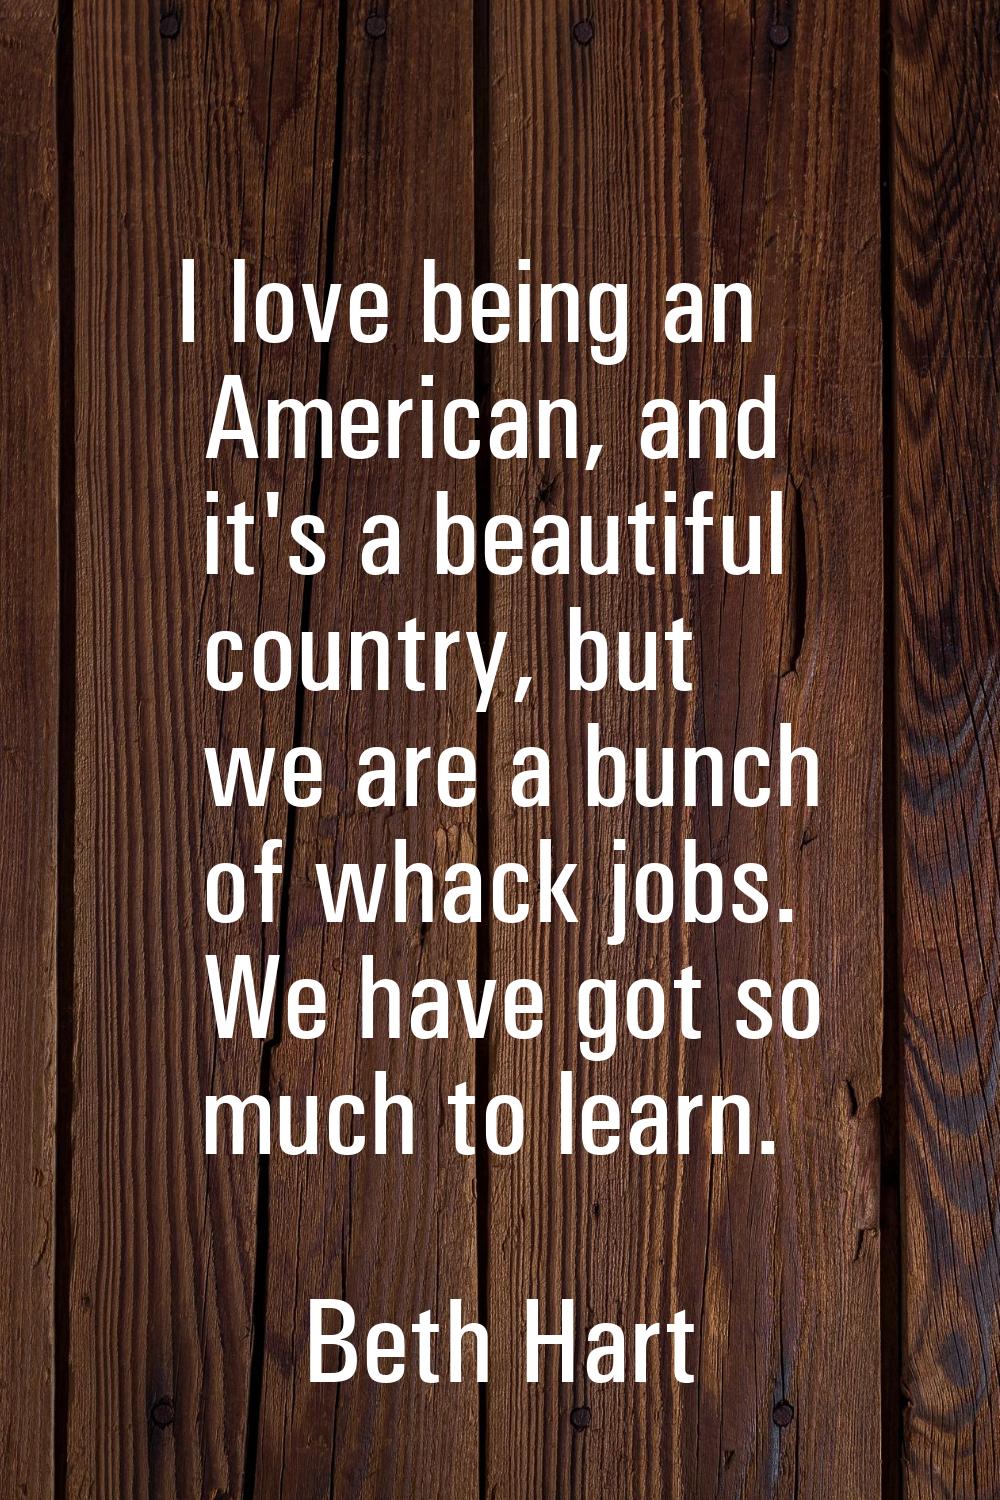 I love being an American, and it's a beautiful country, but we are a bunch of whack jobs. We have g